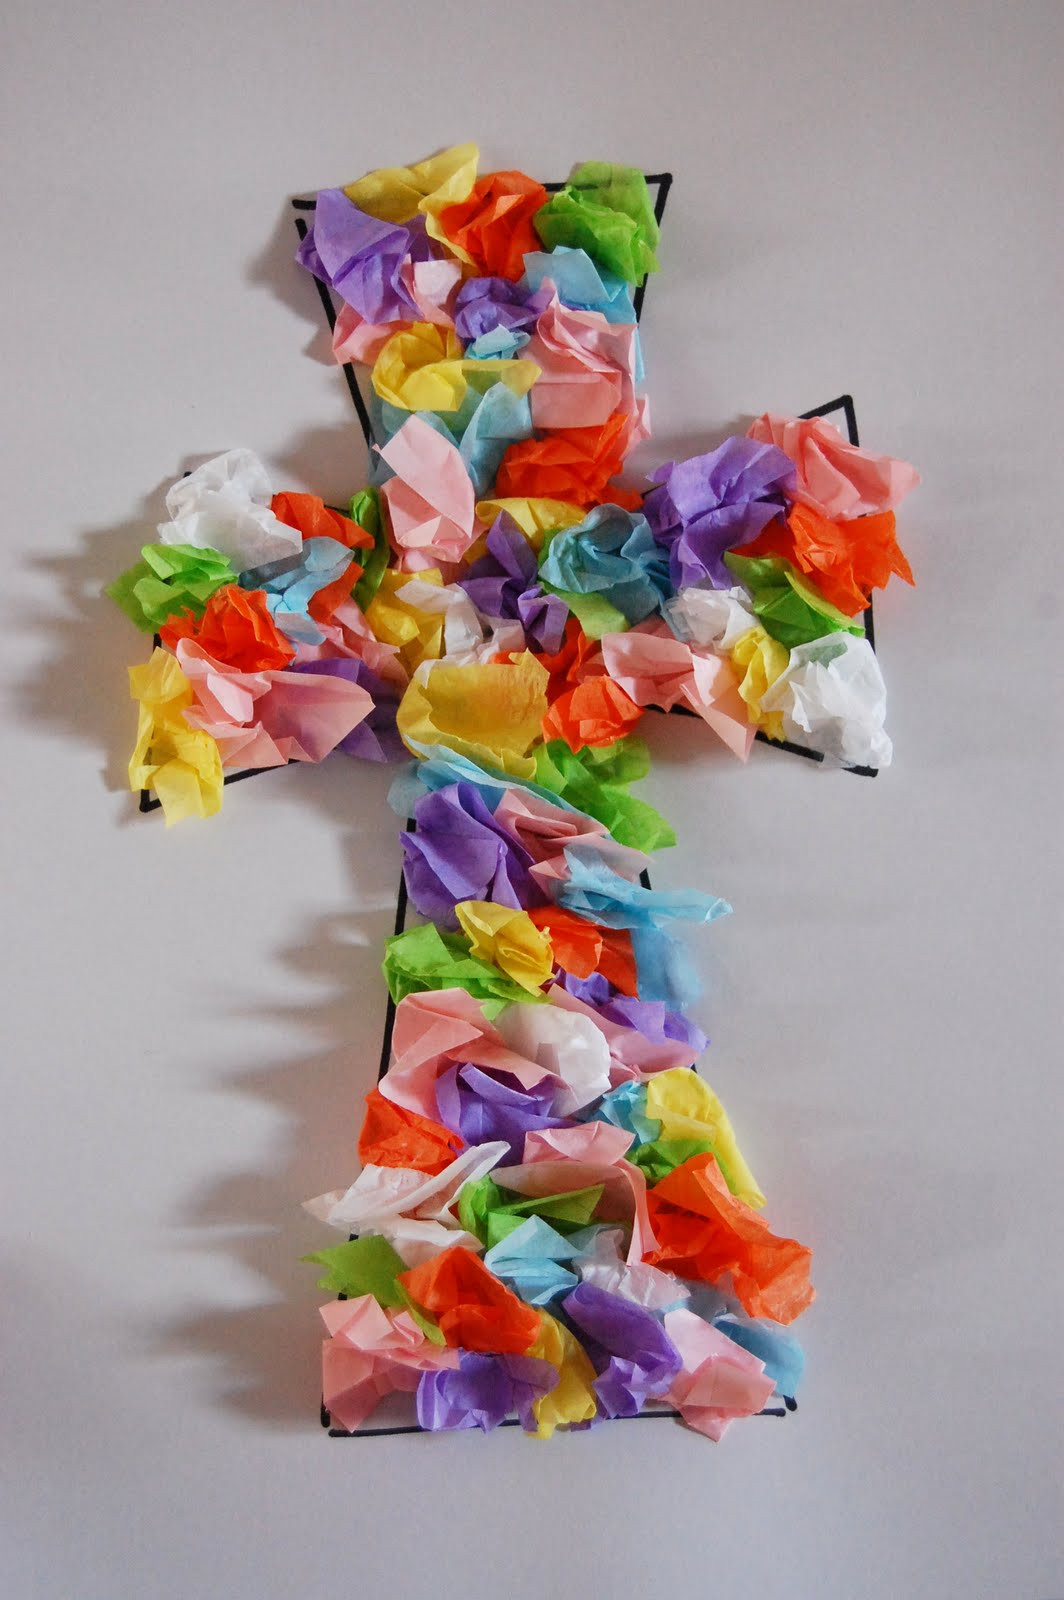 Religious Easter Crafts For Preschoolers
 In Light of the Truth Preschool Craft Easter Cross